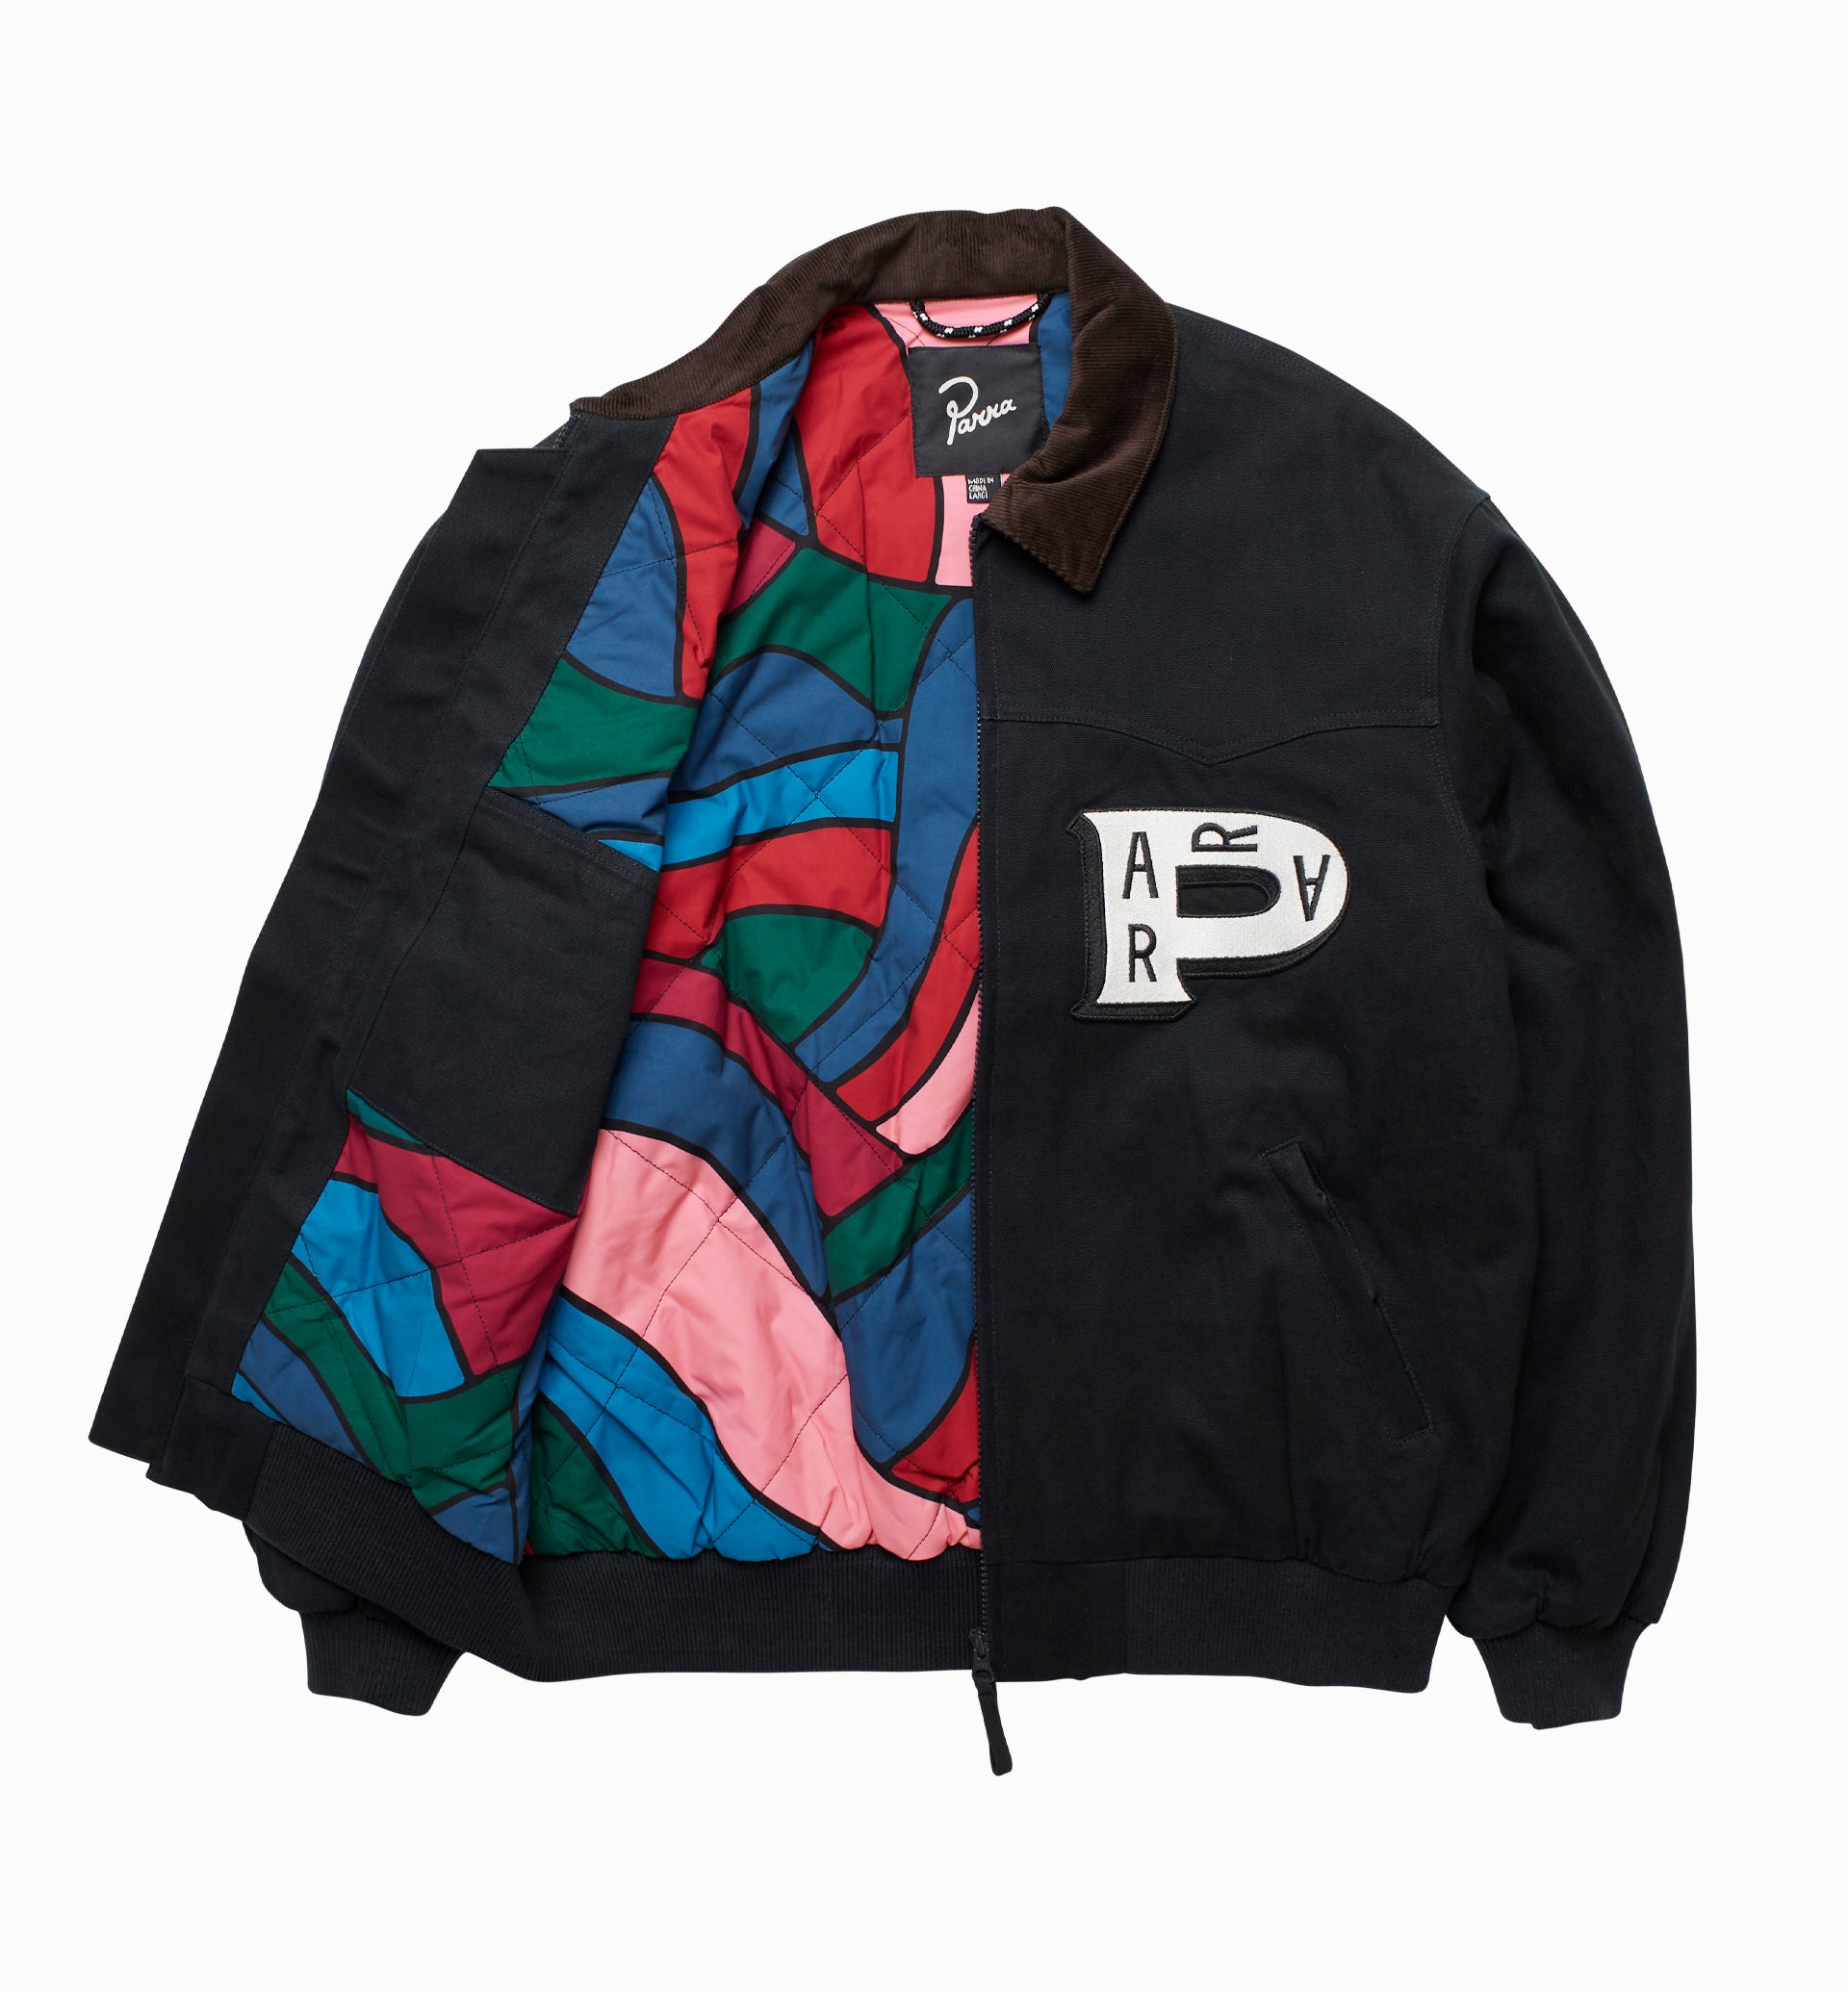 by Parra Worked P Jacket 'Navy'